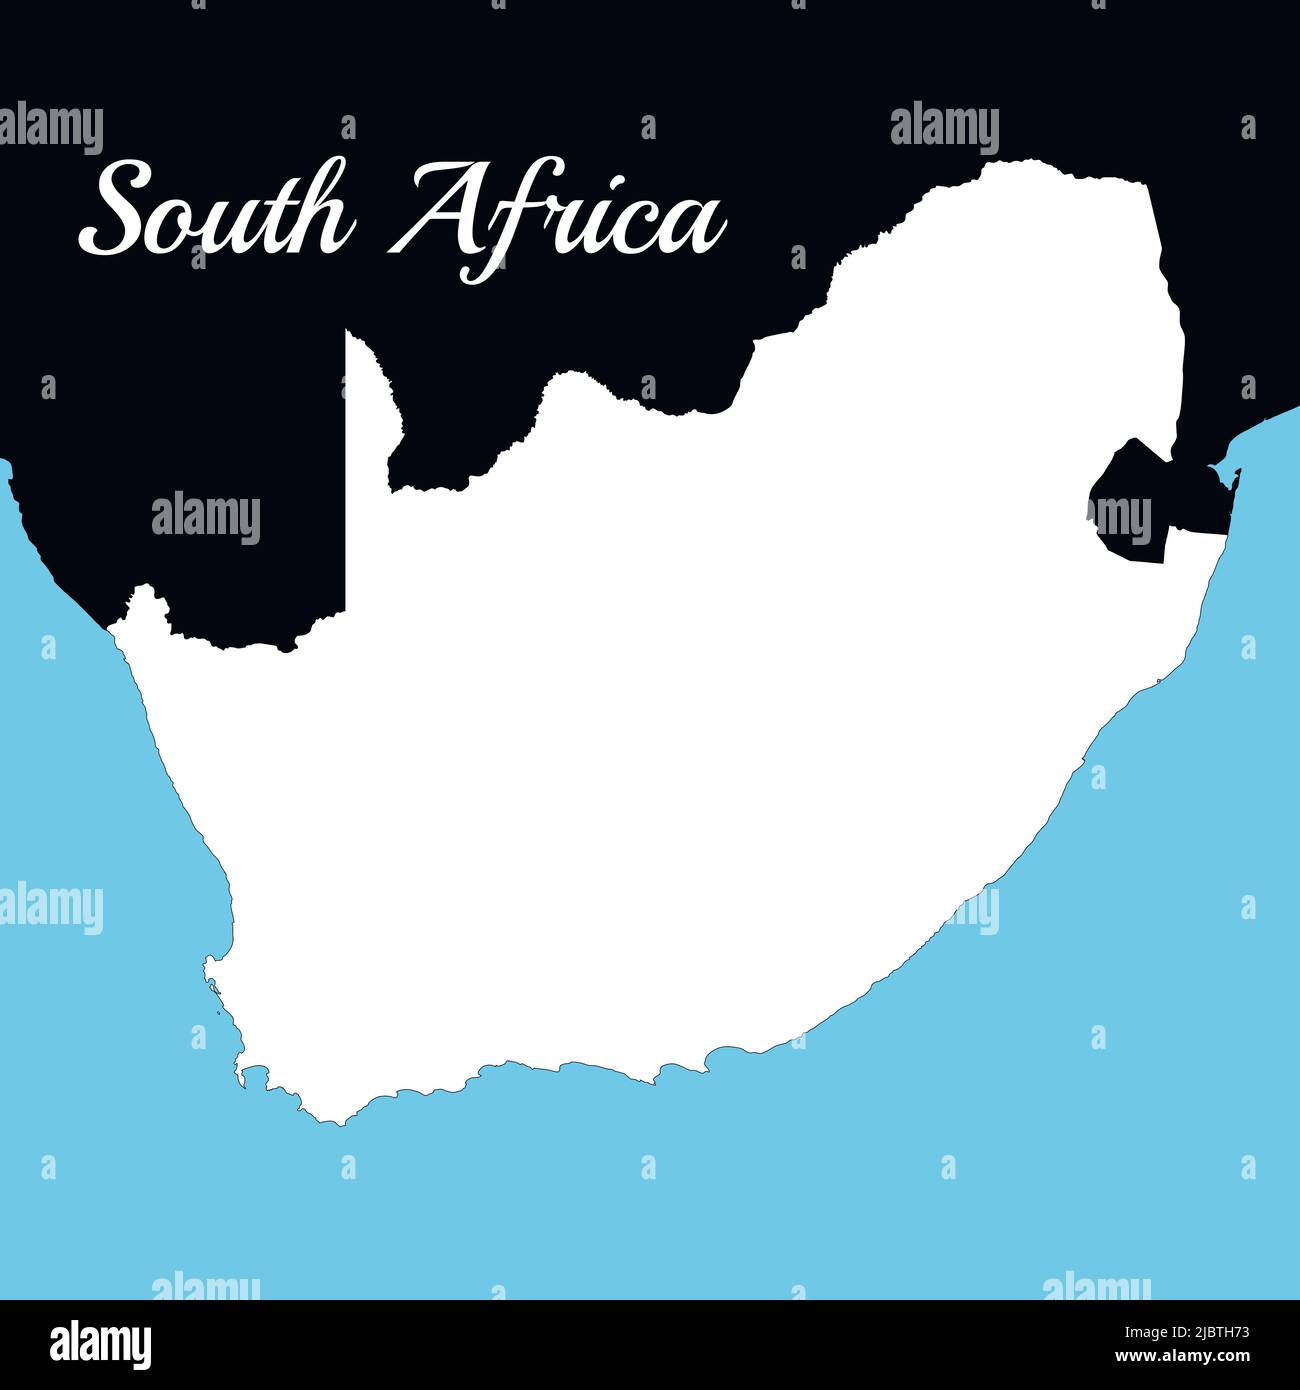 South Africa. Black and white background map, drawn with cartographic accuracy. A bird's-eye view. Stock Vector